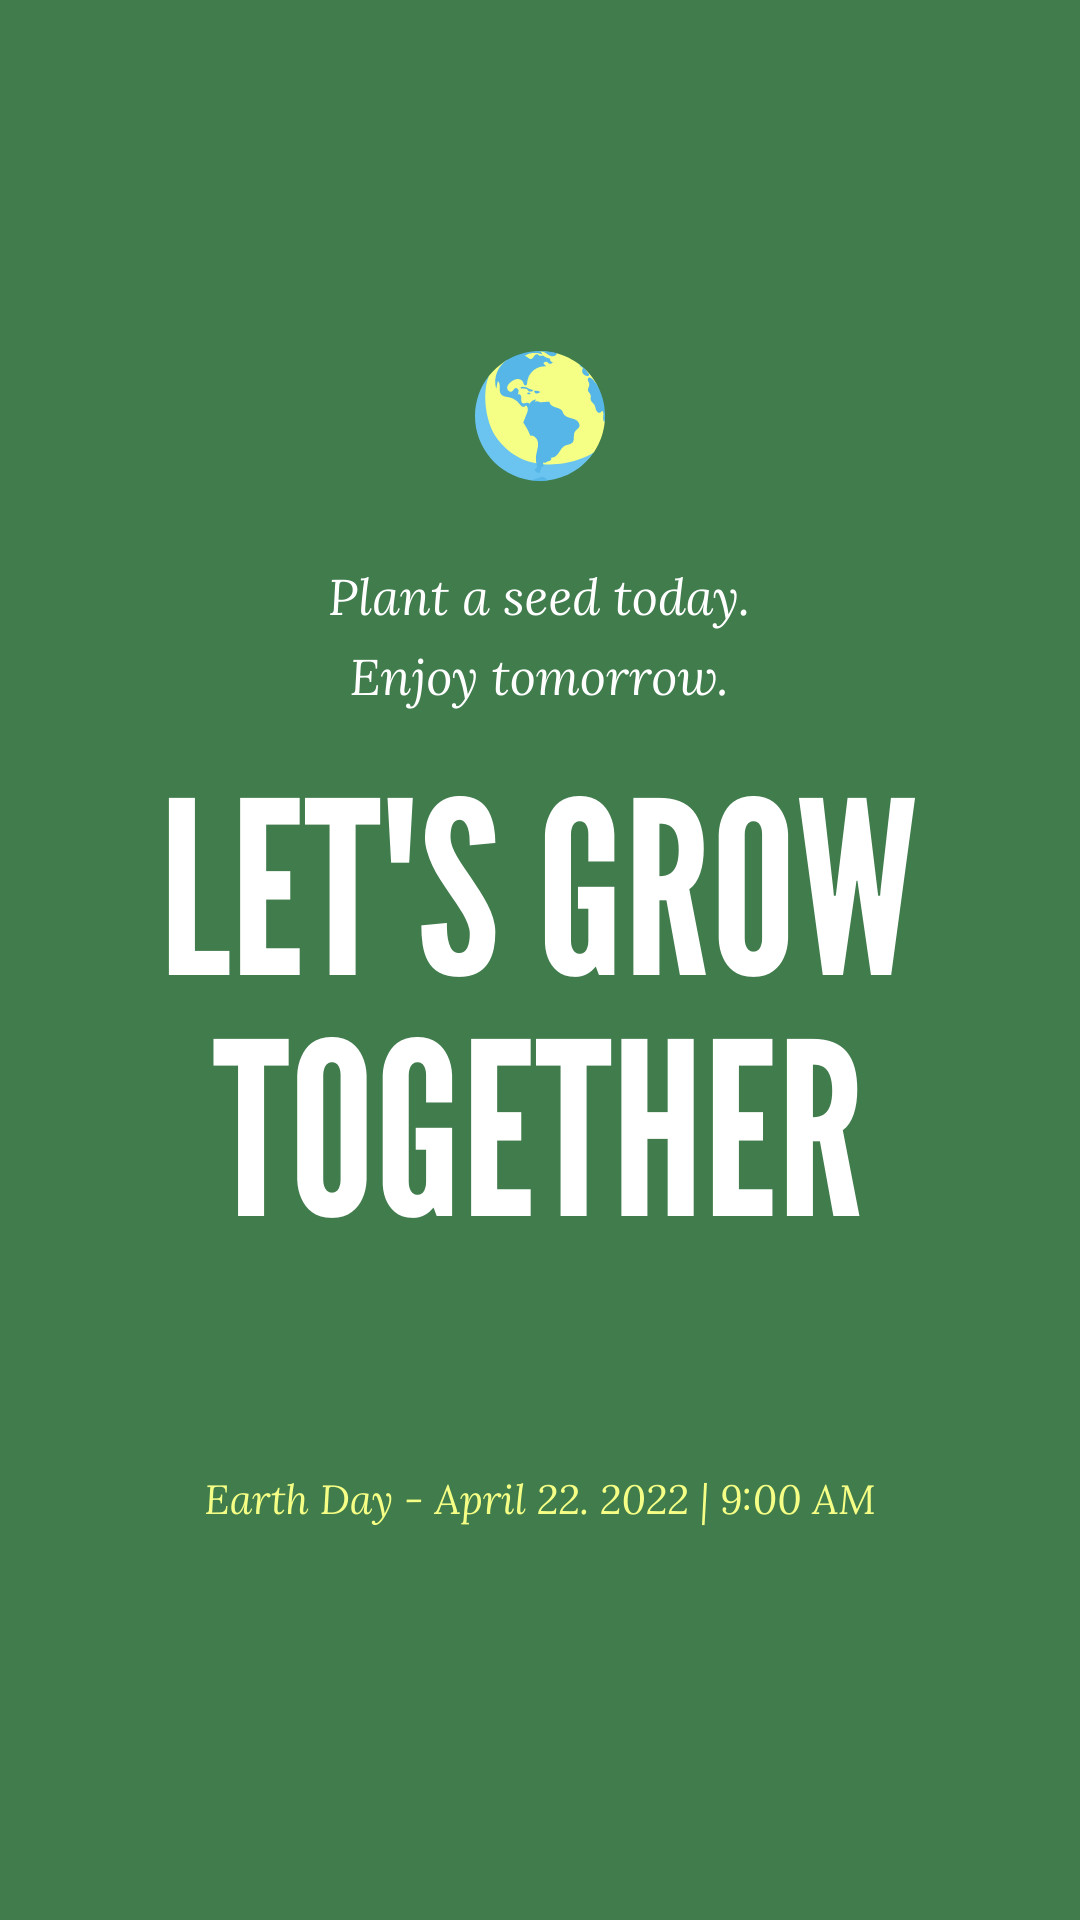 Grow together Earth Day